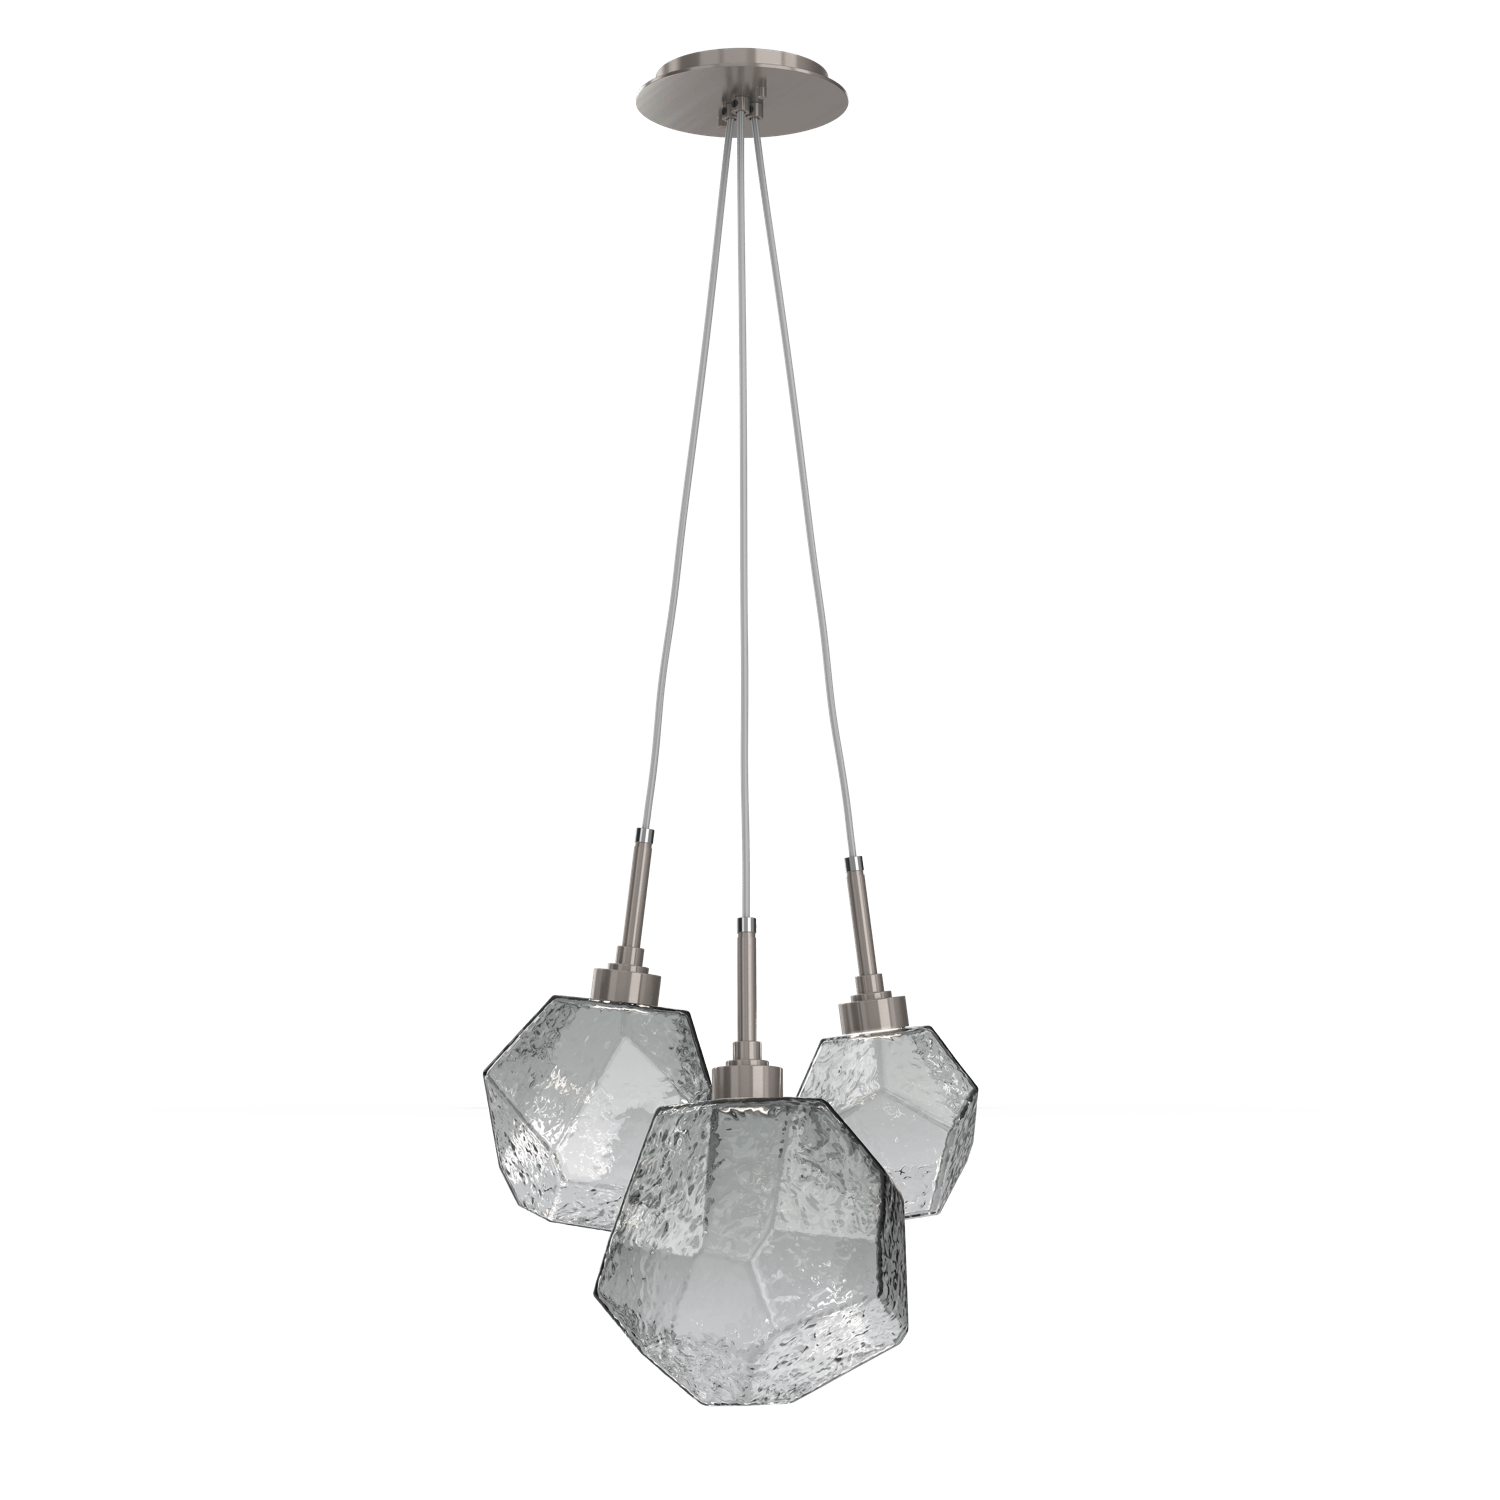 CHB0039-0E-GM-S-Hammerton-Studio-Gem-3-light-cluster-pendant-light-with-gunmetal-finish-and-smoke-blown-glass-shades-and-LED-lamping